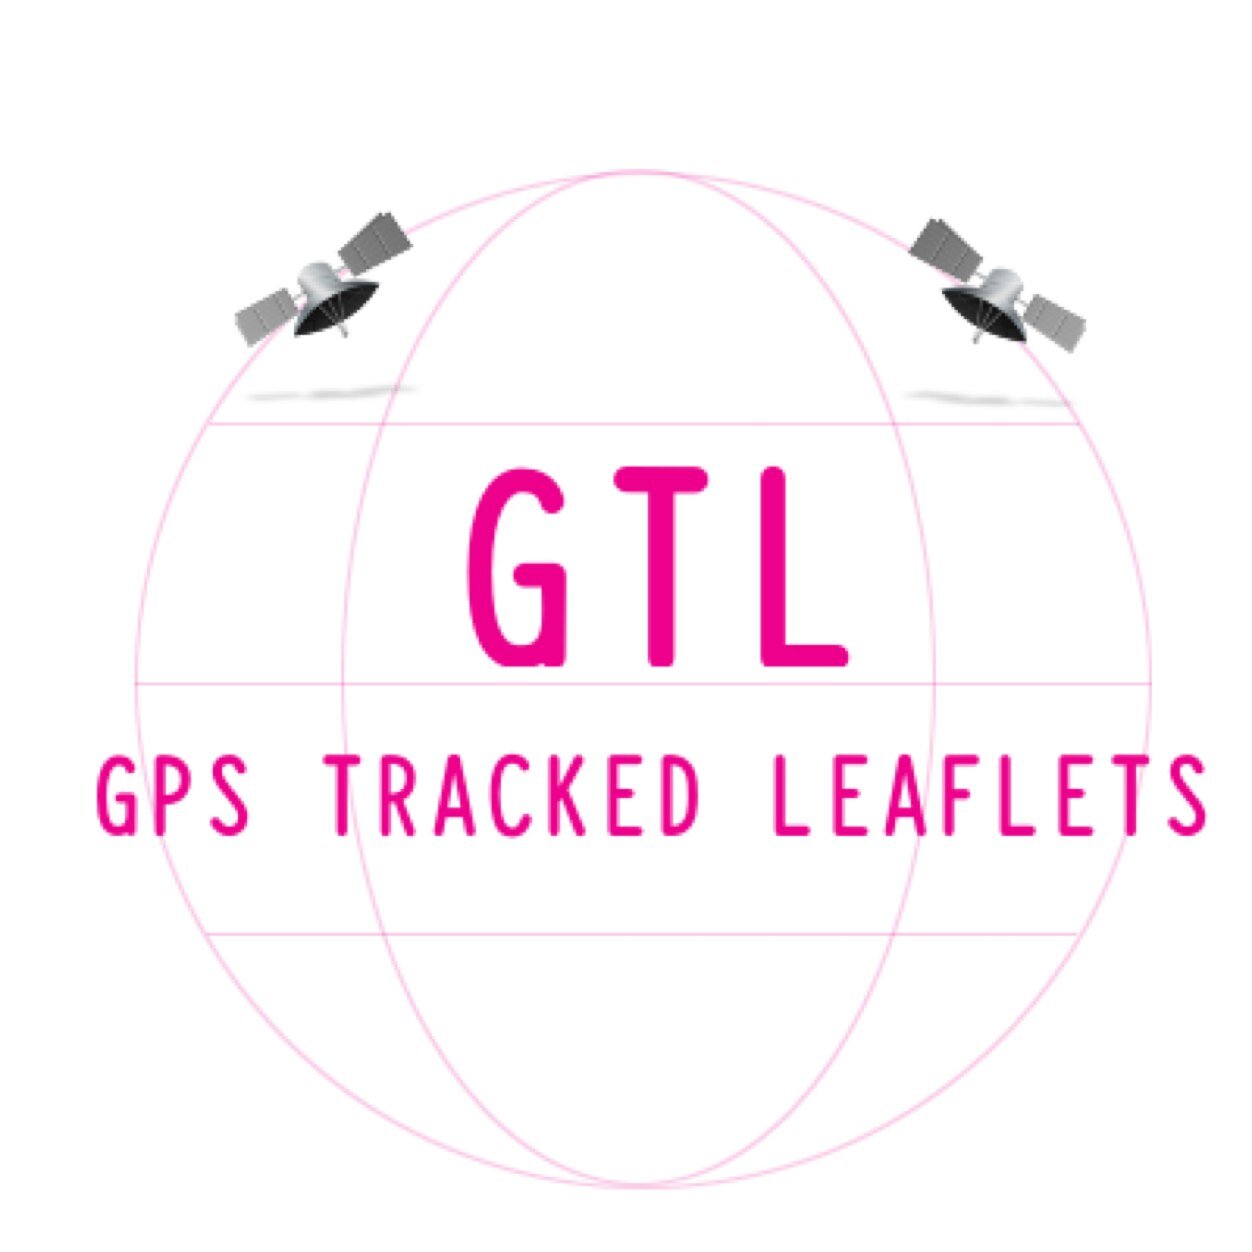 leaflet distribution you can rely on in Sussex ! we GPS track every single leaflet so that you get the service you deserve at a price thats right for you.